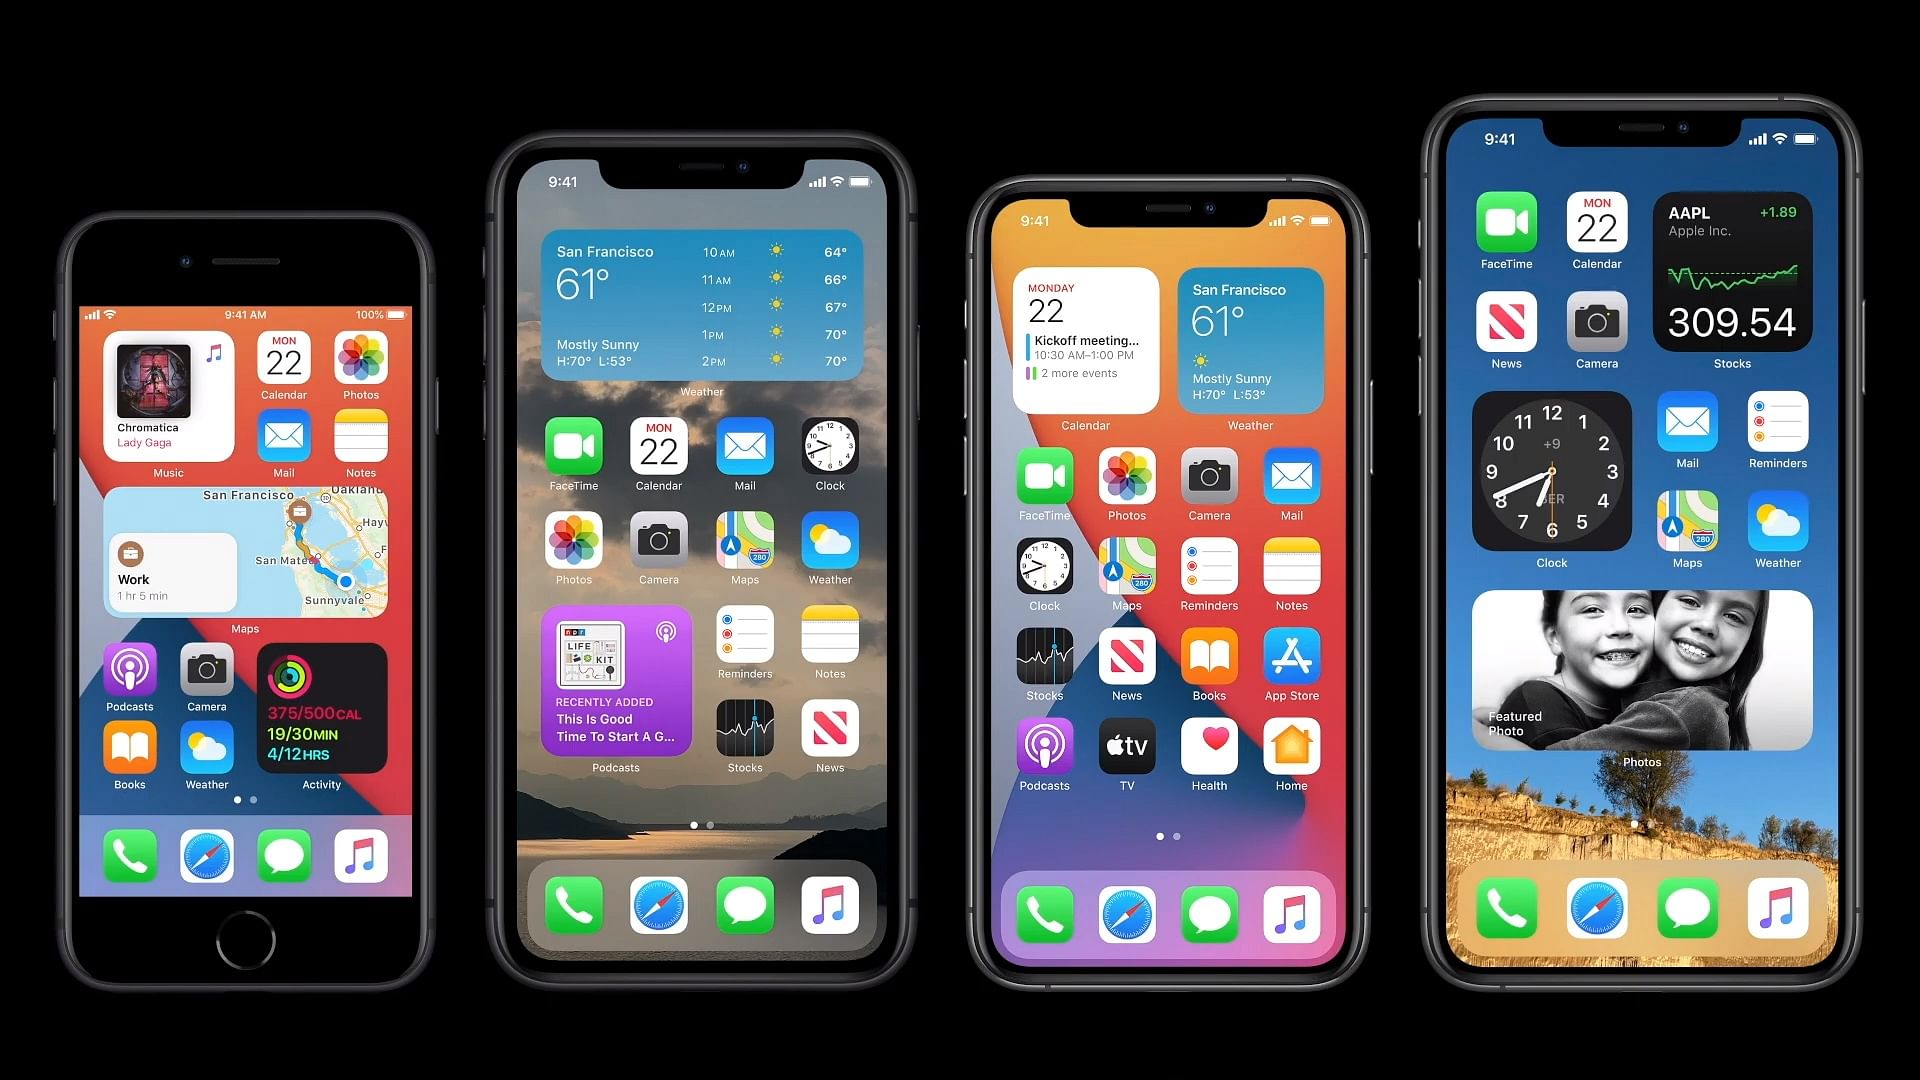 The new iOS 14 comes with customisable widgets for the home screen.